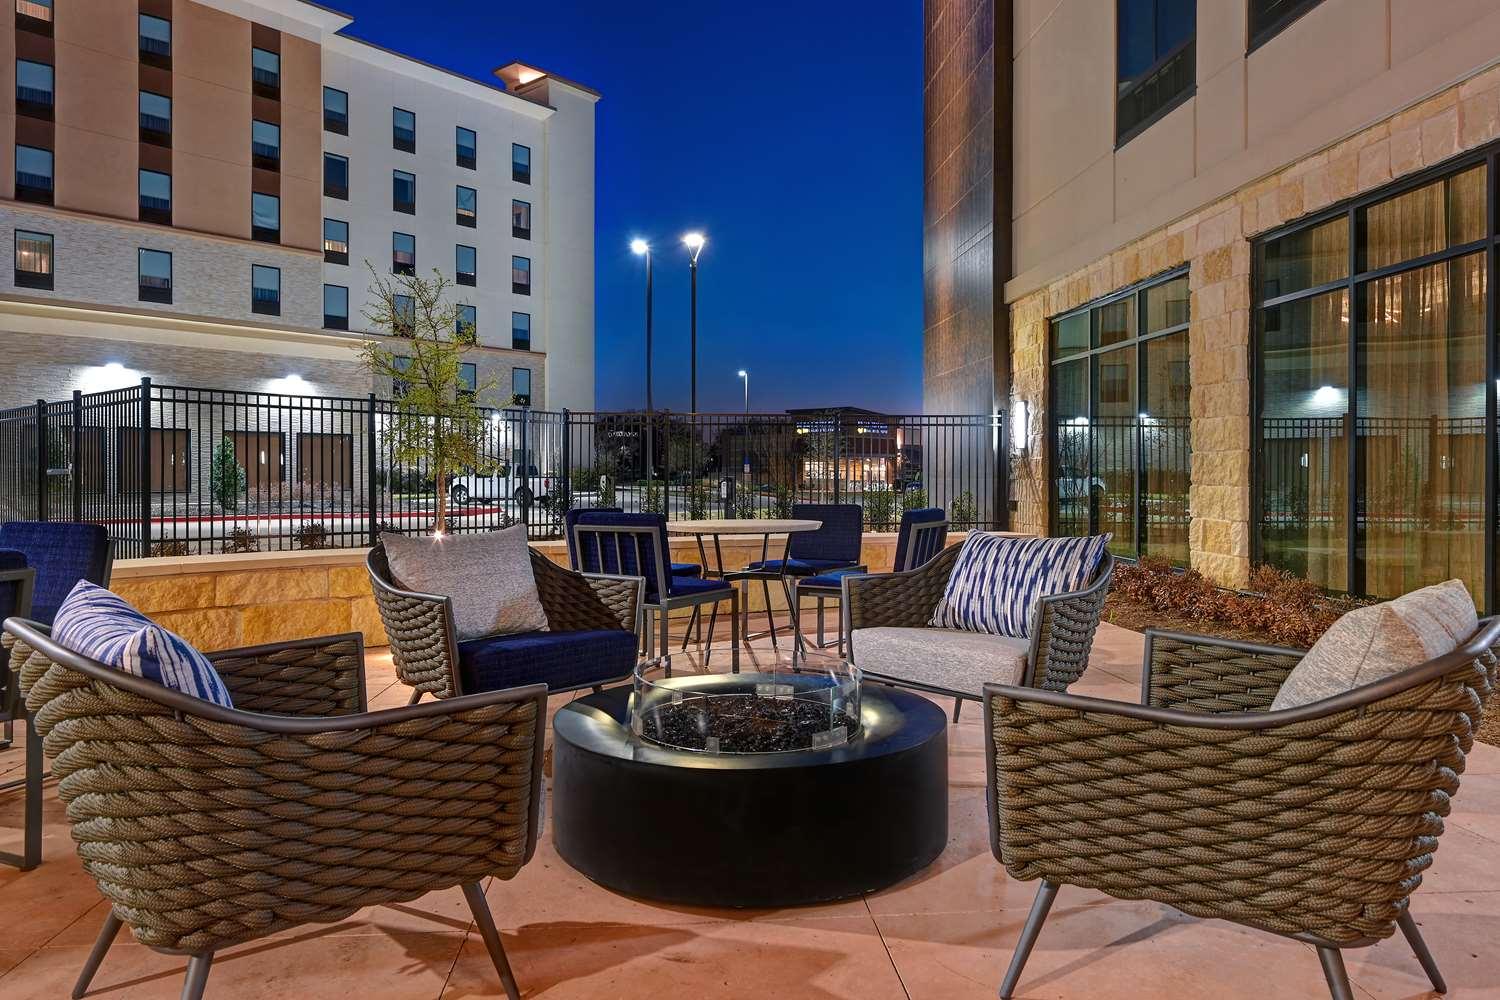 Homewood Suites by Hilton Dallas The Colony in The Colony, TX